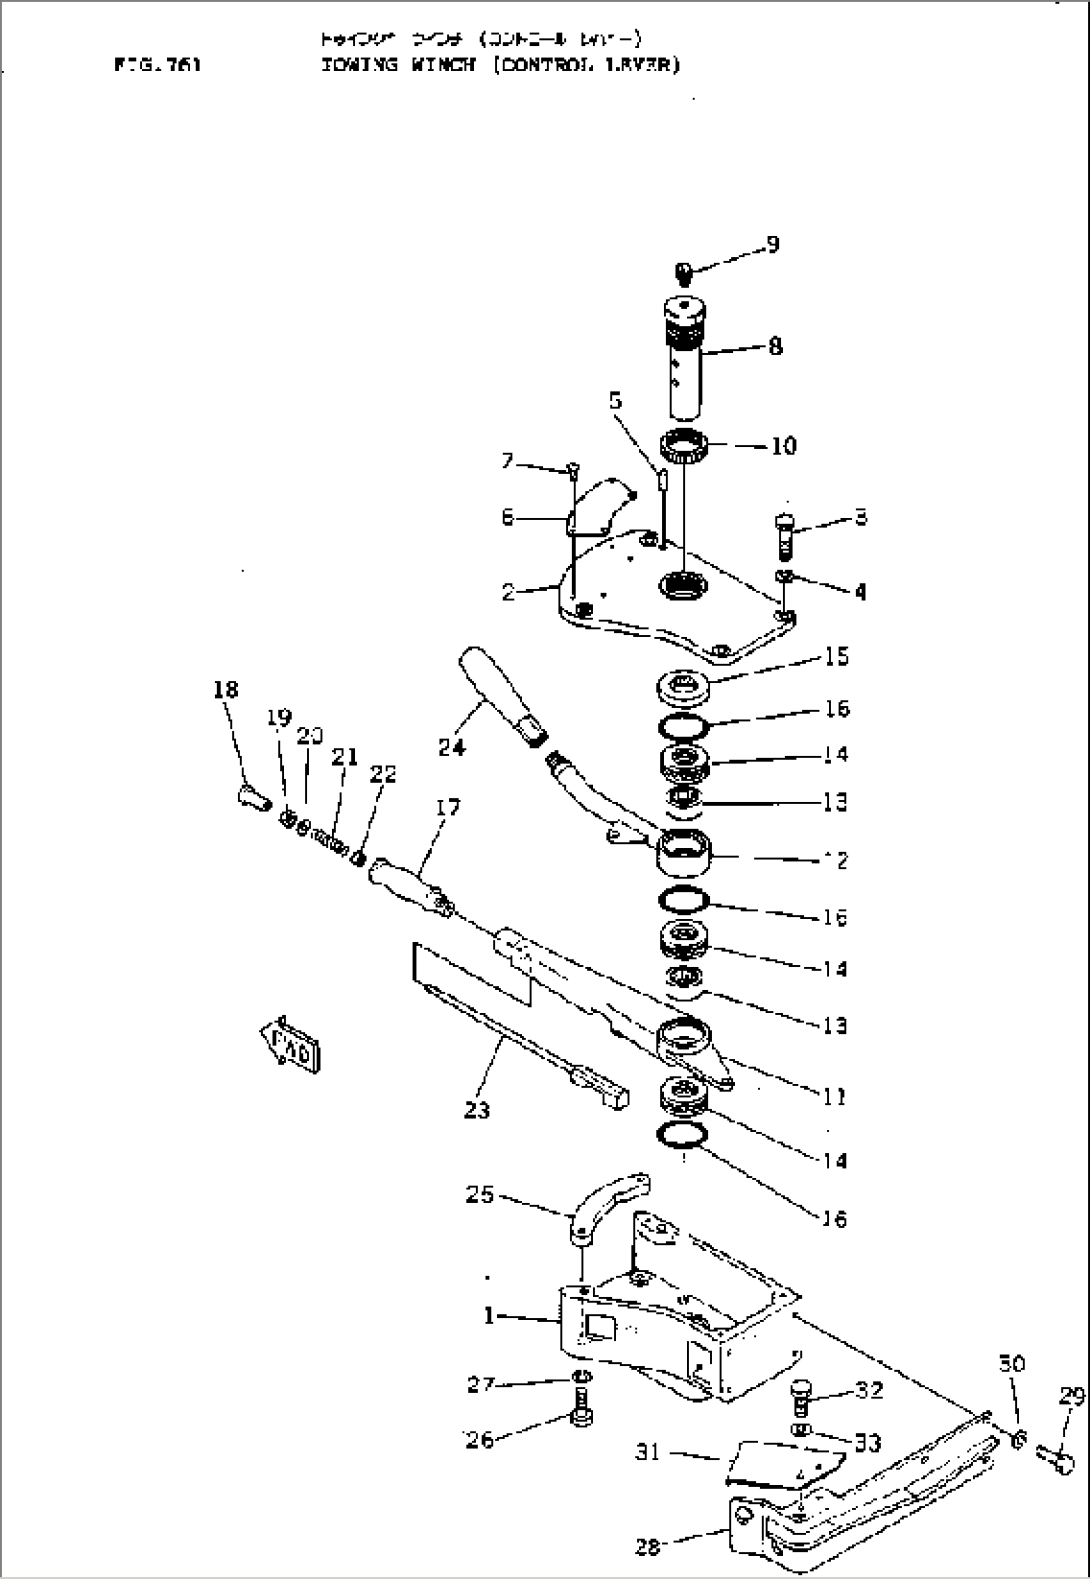 TOWING WINCH (CONTROL LEVER)